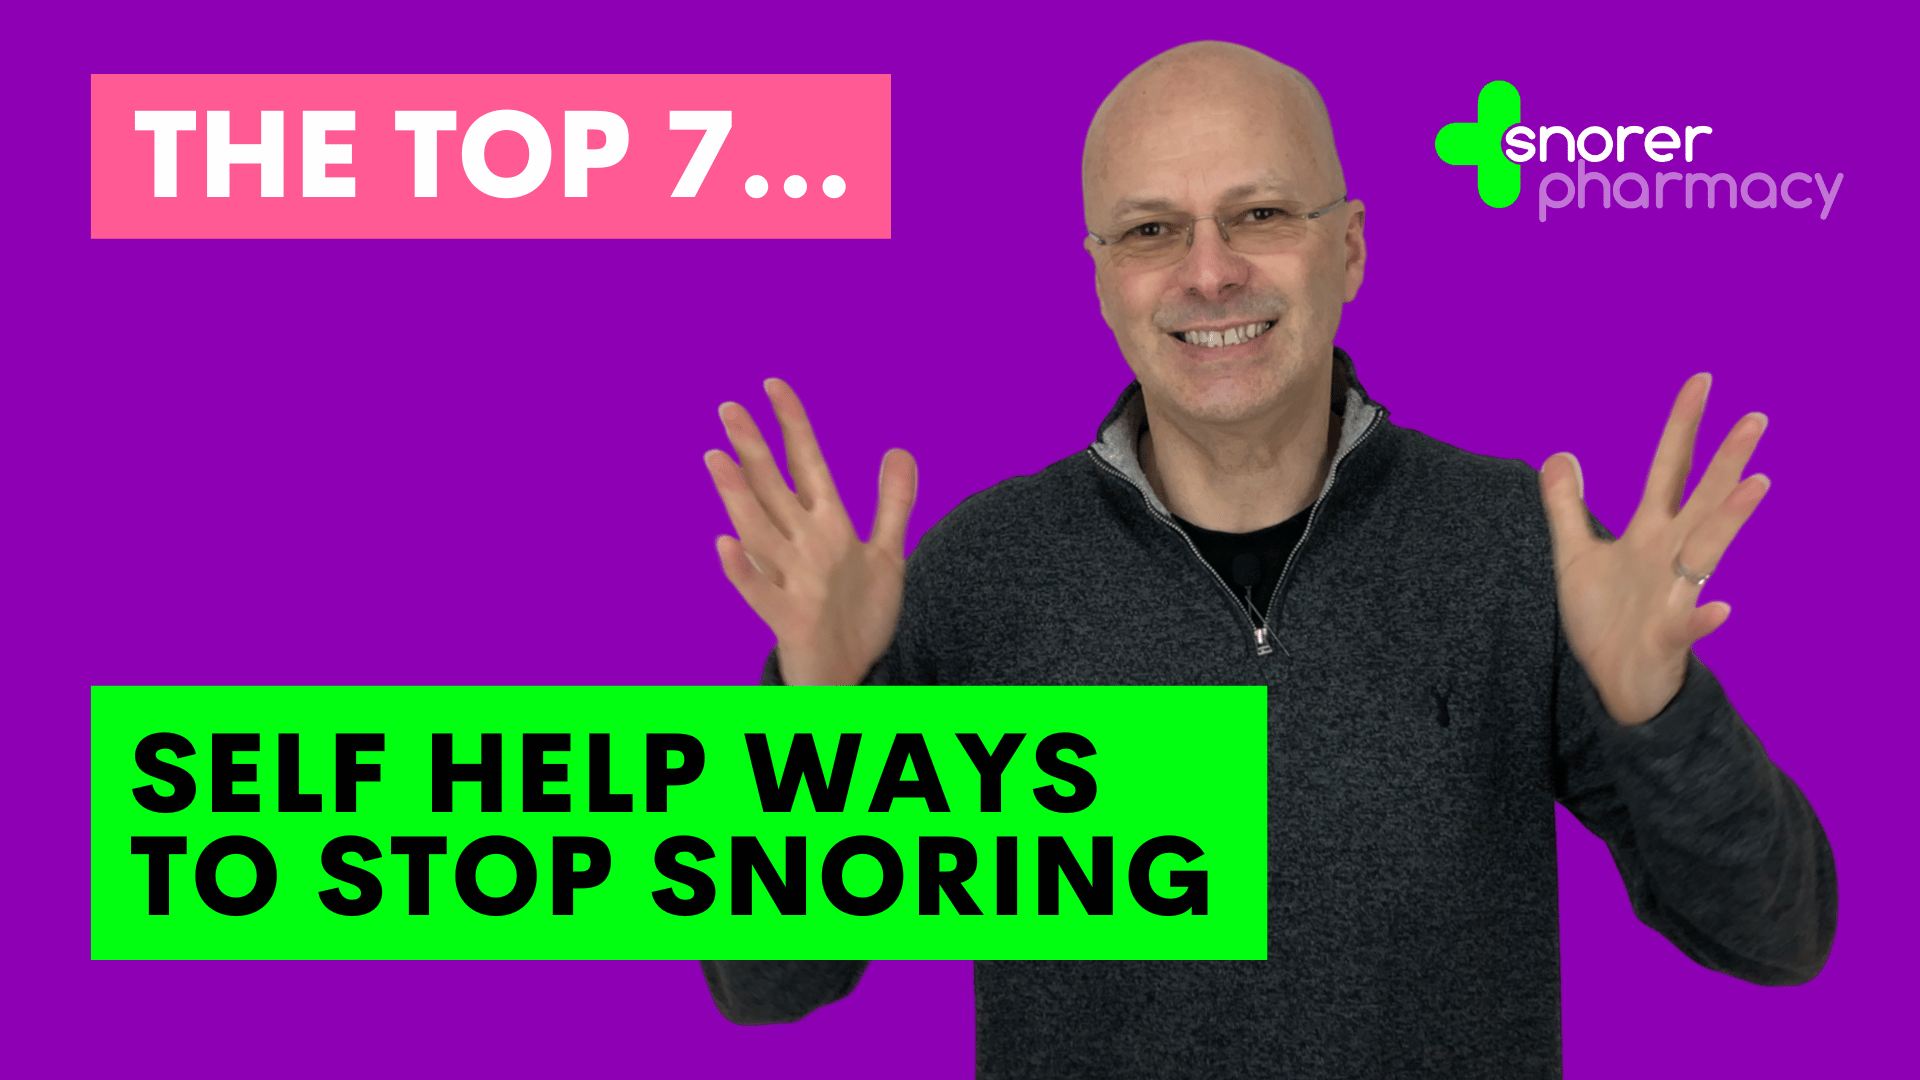 Self-Help Ways to Stop Snoring and reduce the severity of Sleep Apnoea. Known as Lifestyle Changes